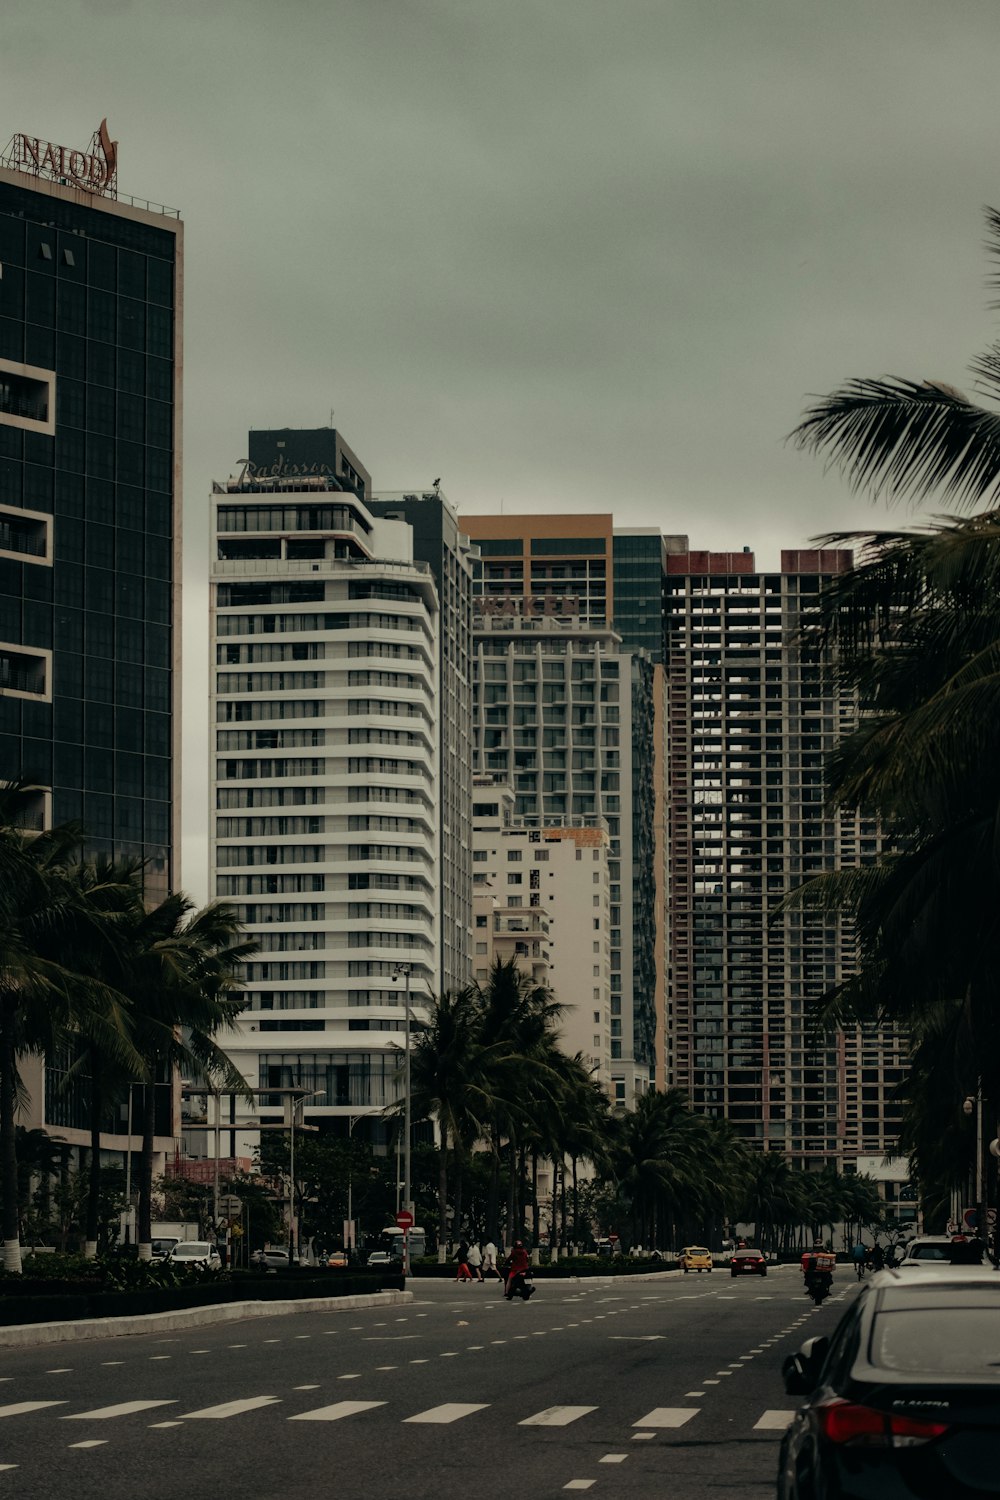 a city street lined with tall buildings and palm trees